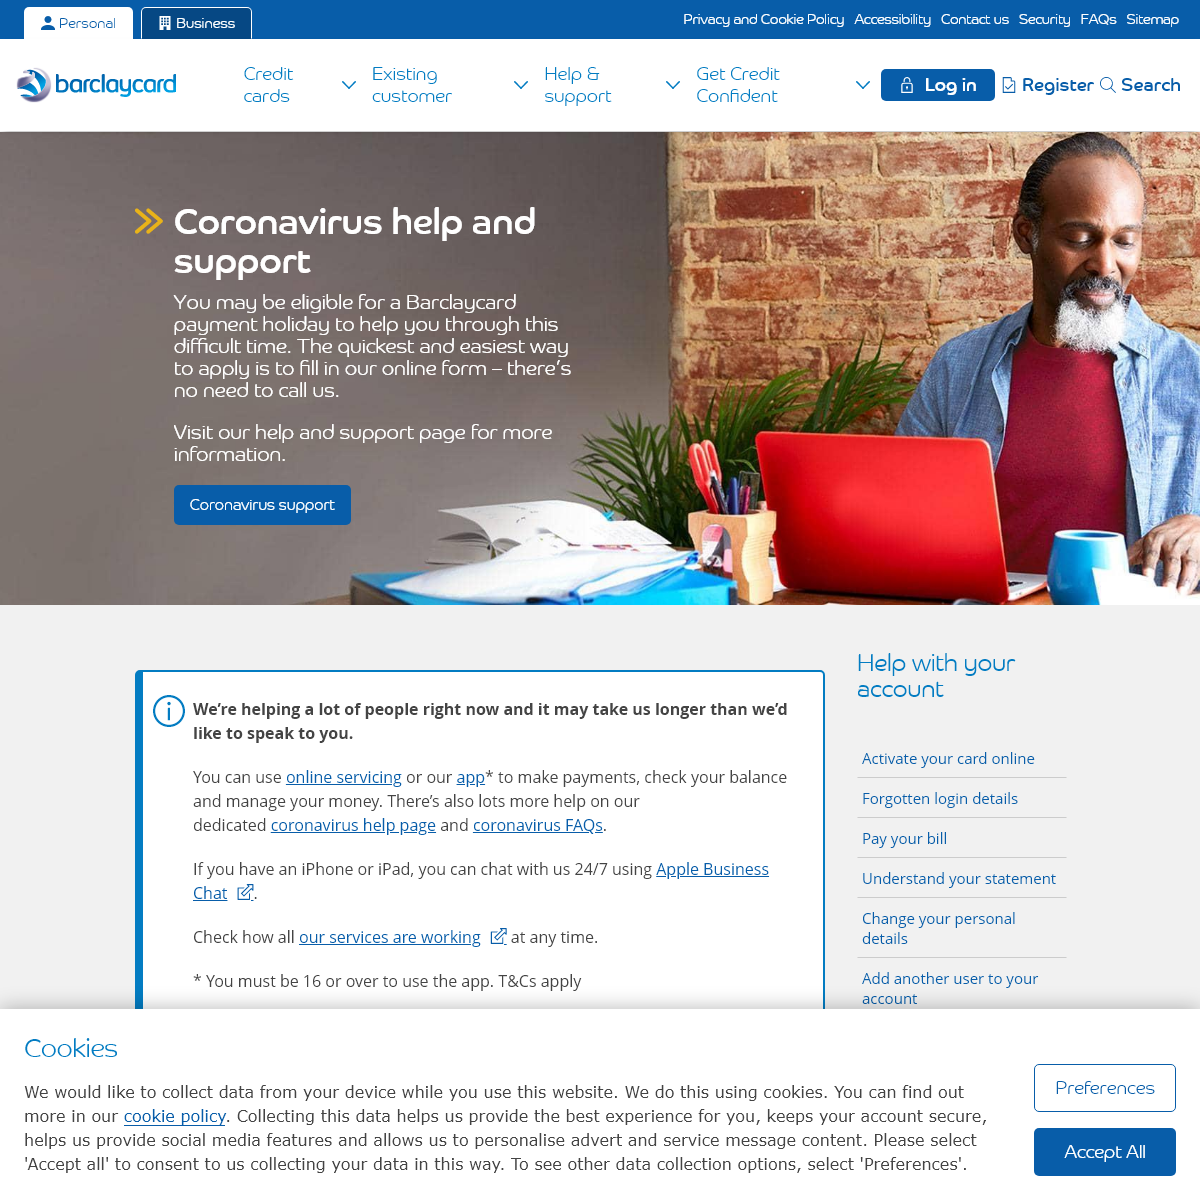 A complete backup of barclaycard.co.uk